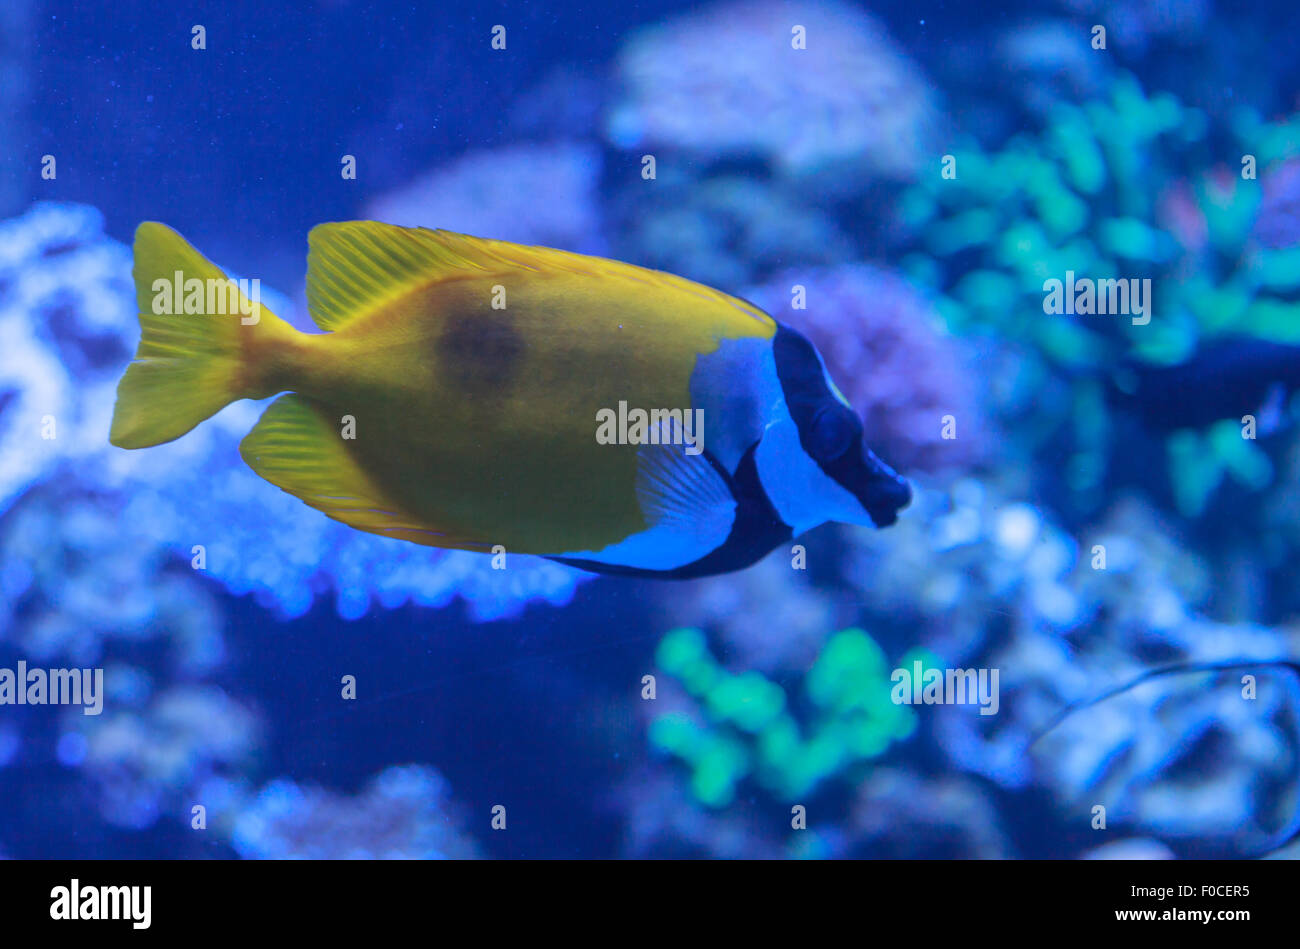 Foxface rabbitfish, Siganus vulpinus, is a yellow fish with black and white bands across its face. Stock Photo